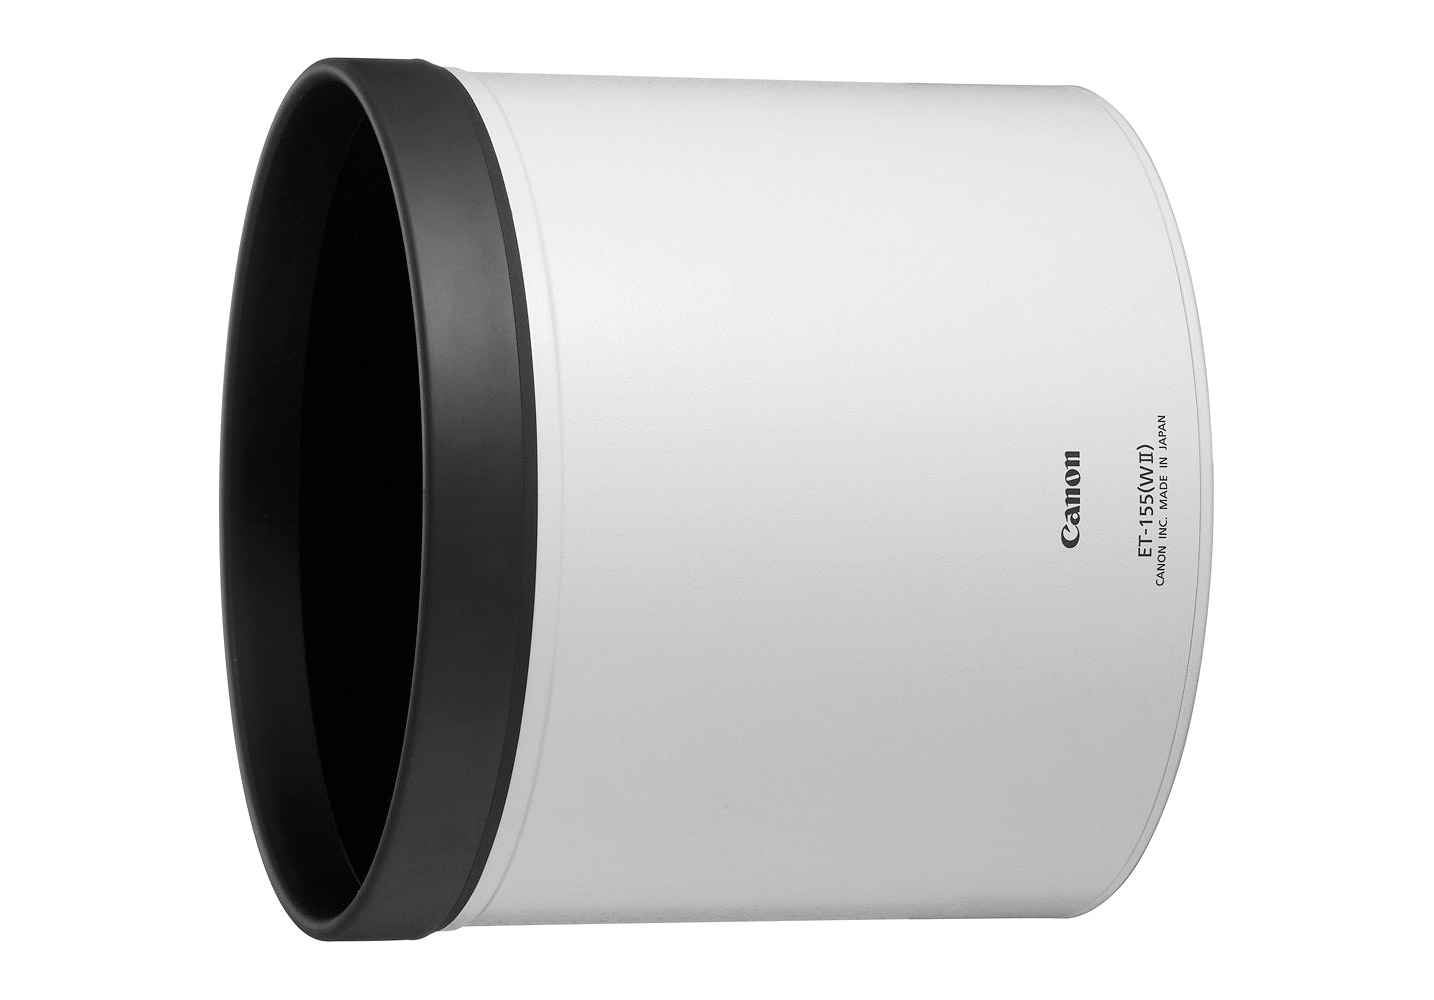 Canon EF 800mm f/5.6 L IS USM